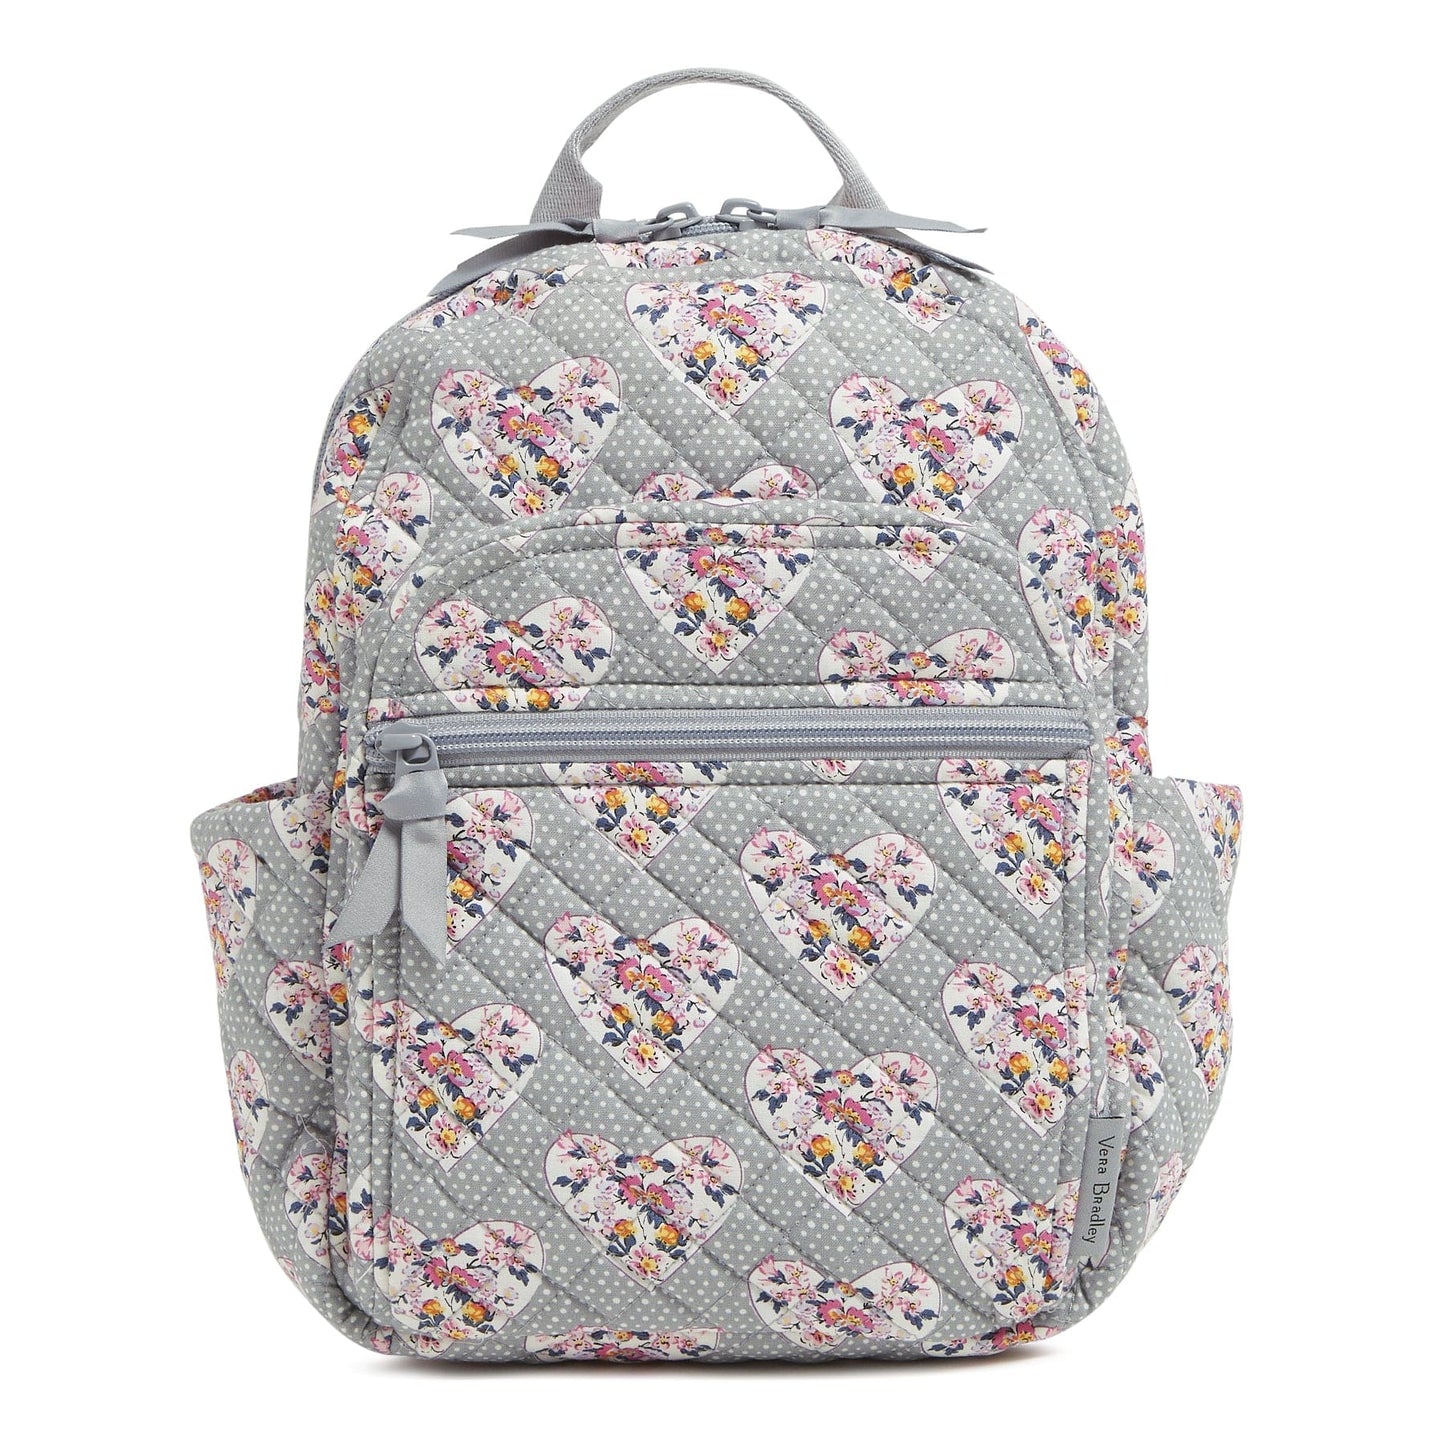 Small Backpack-Mon Amour Gray-Image 1-Vera Bradley